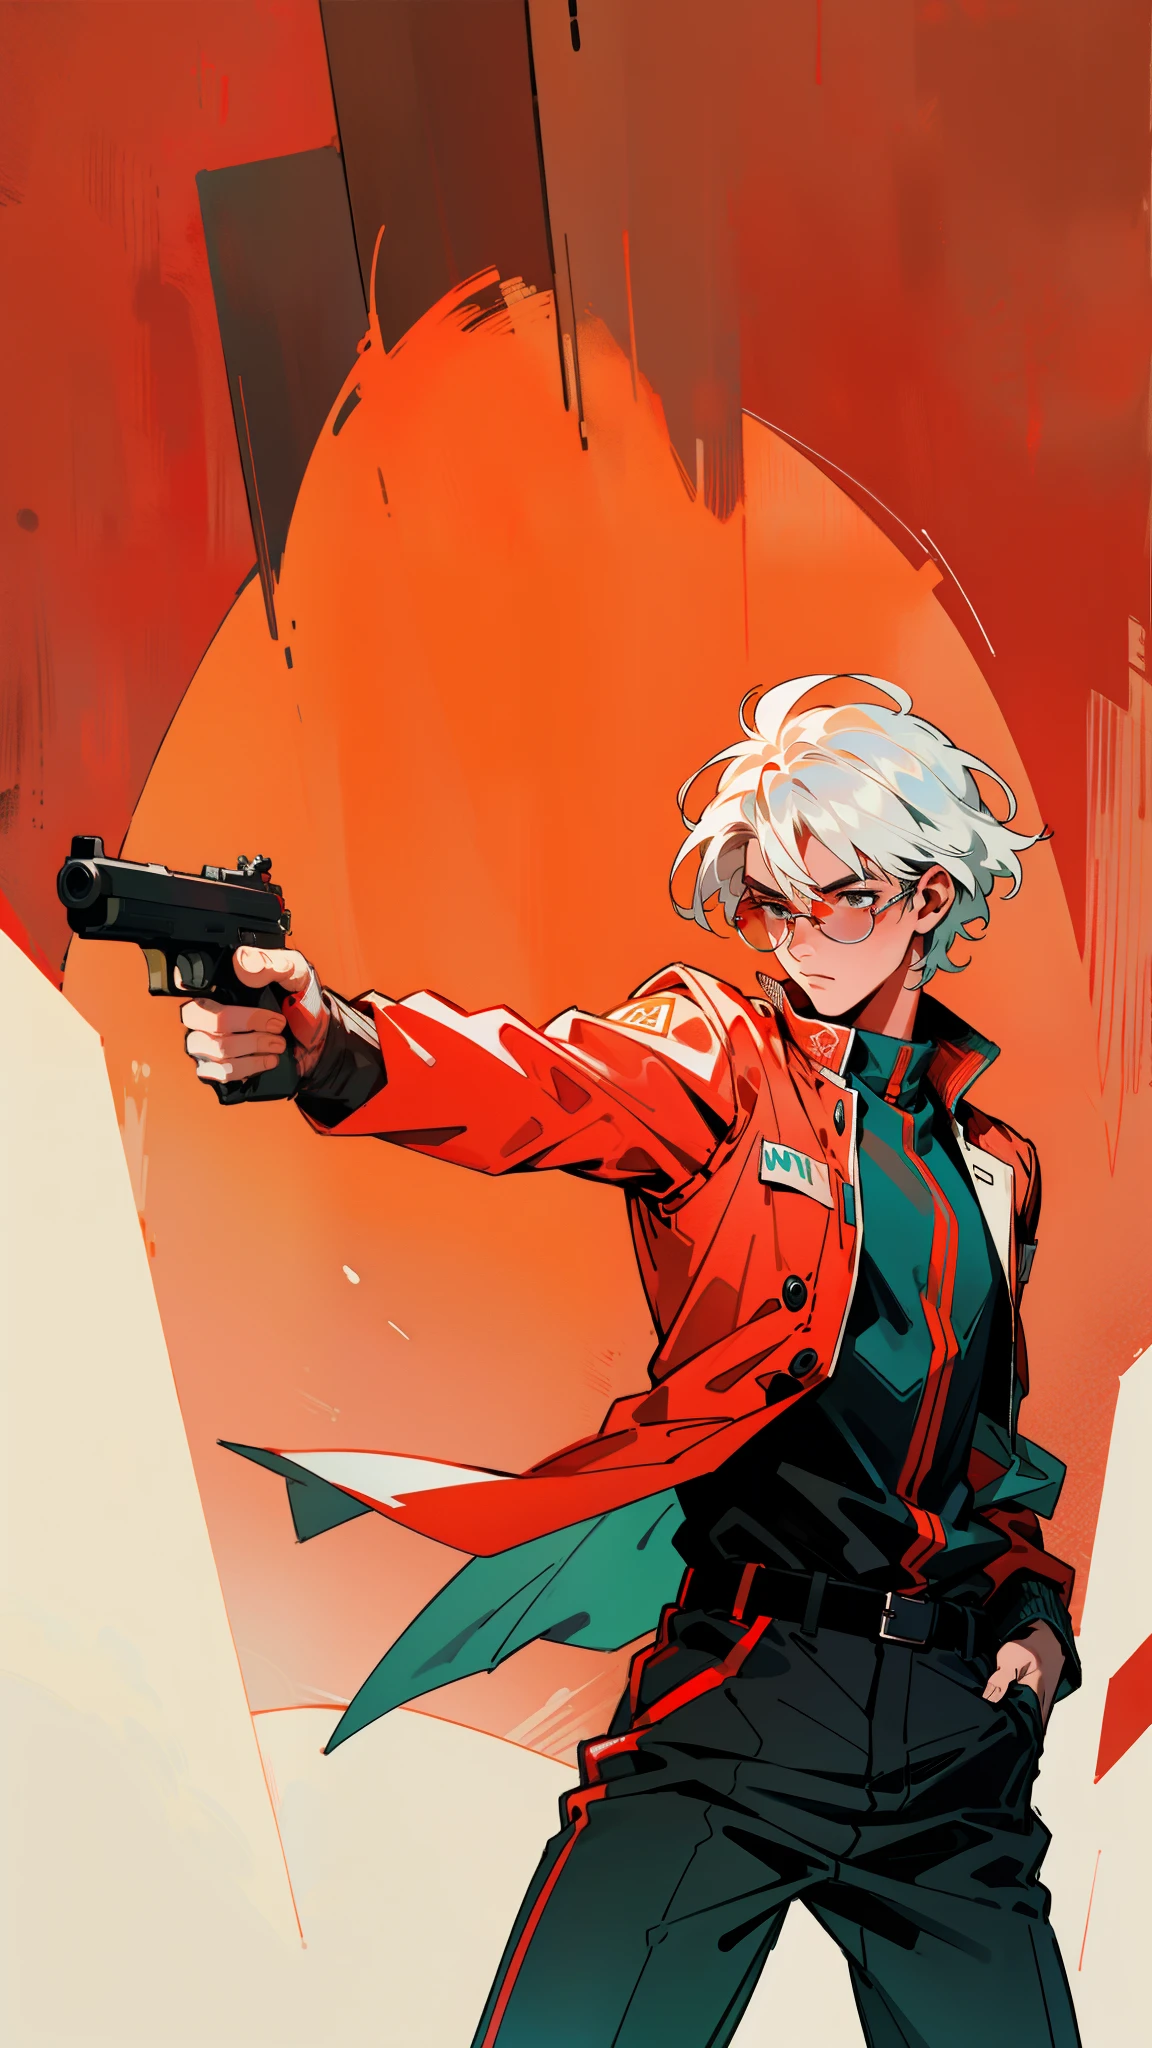 an intense action movie scene, a young man with striking white hair and clad in vibrant red attire, donning sleek red glasses, stands poised, holding a gun with determined focus, aiming with precision. Dynamic, high-octane lighting accentuates the tension, tachi-e, fashionable, outfit, posing, front, colorful, dynamic, background, elements, confident, expression, holding, statement, accessory, coiled, around, scene, text, cover, attention-grabbing, title, stylish, catchy, headline, larger, striking, modern, focus, fashion